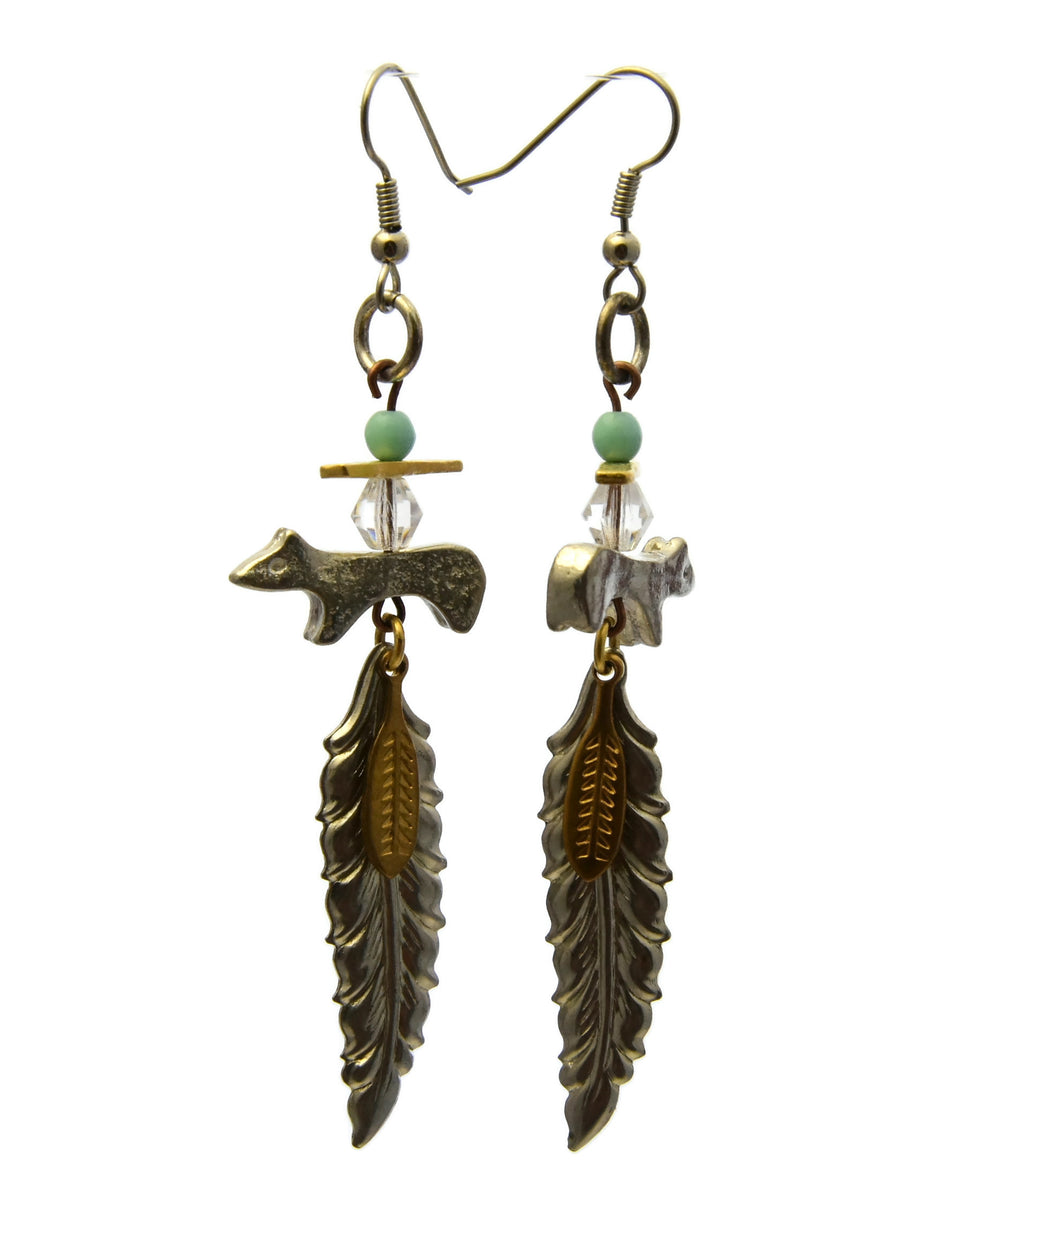 Bear and Feather earrings